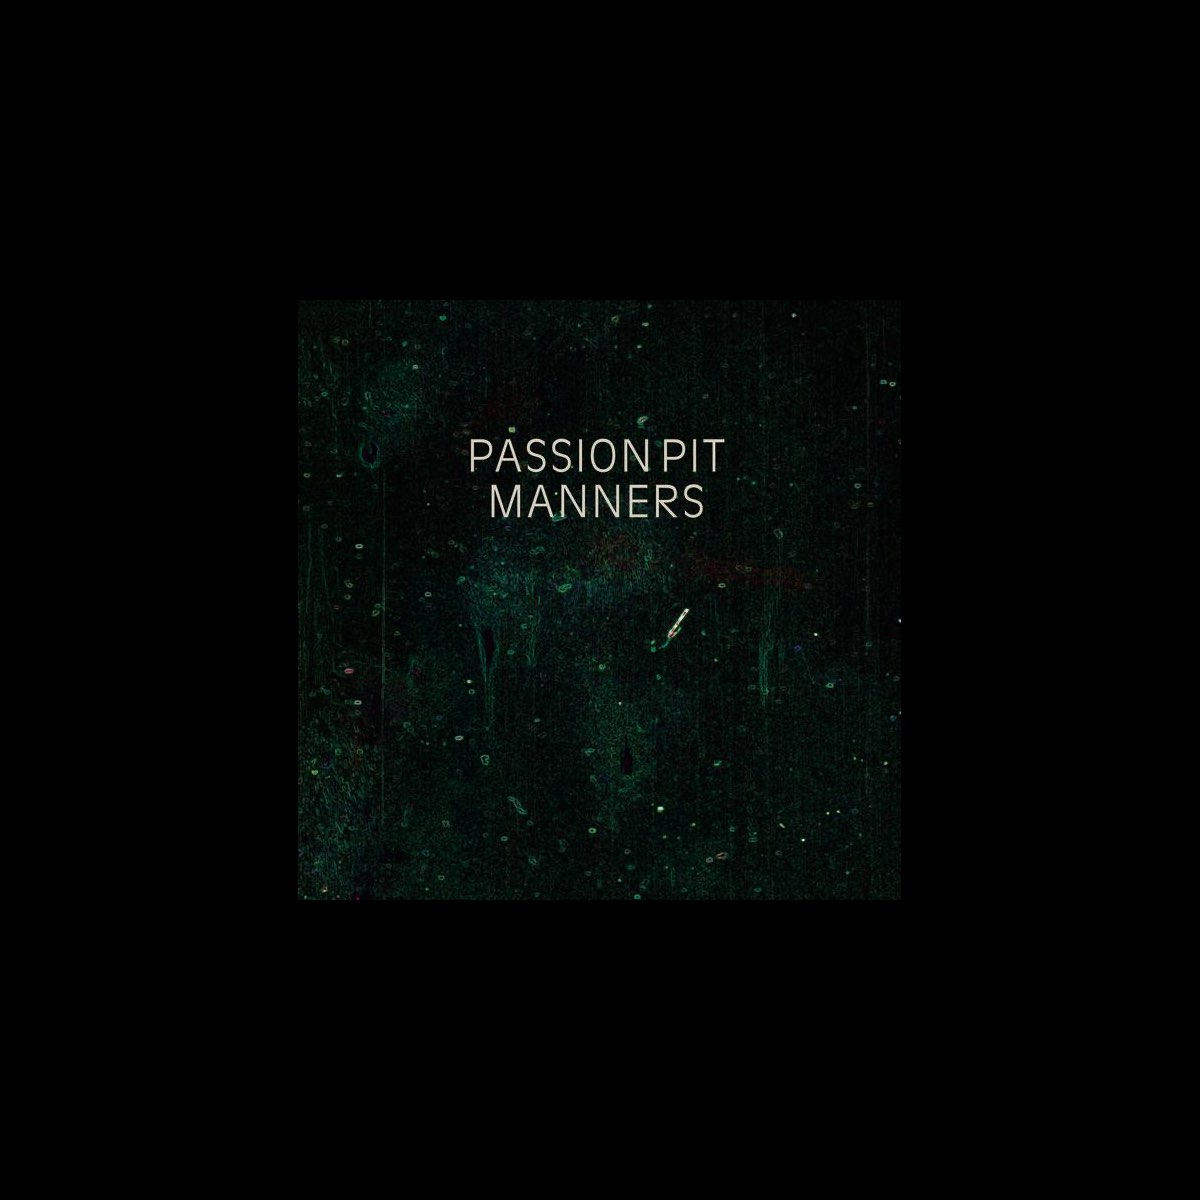 ‎manners By Passion Pit On Apple Music